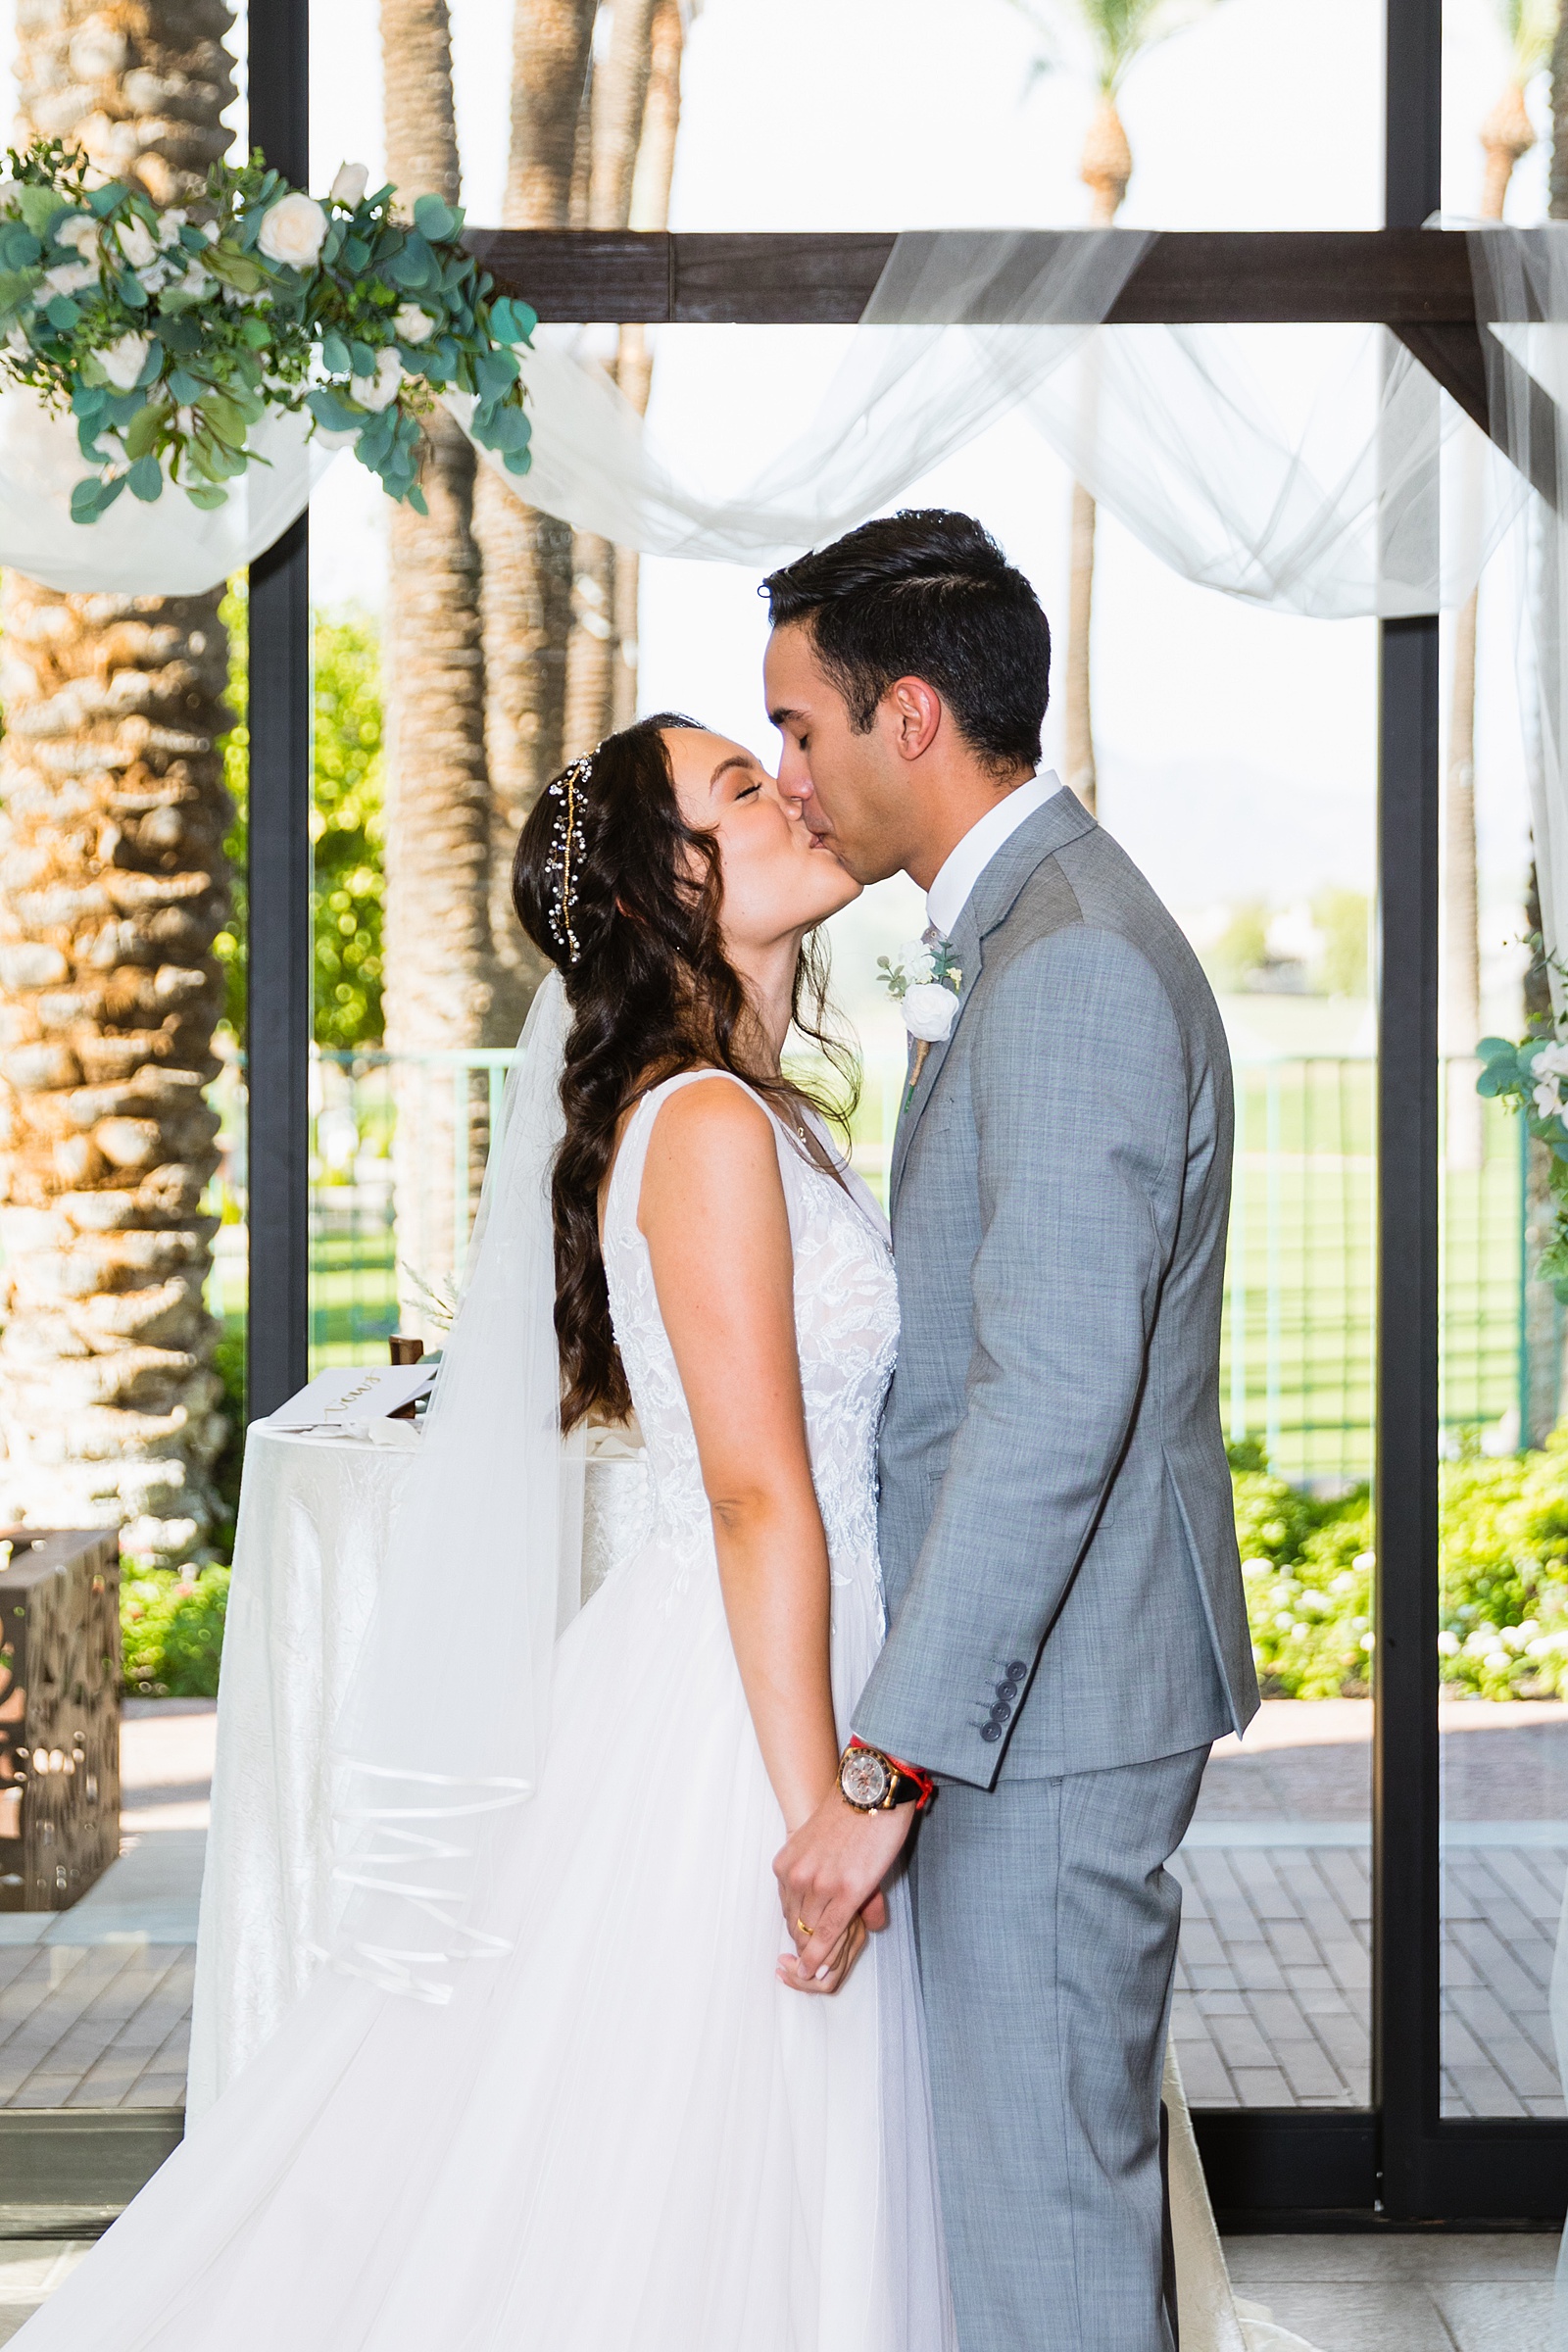 Bride and groom share their first kiss during their wedding ceremony at Hyatt Regency Scottsdale Resort & Spa At Gainey Ranch by Arizona wedding photographer PMA Photography.